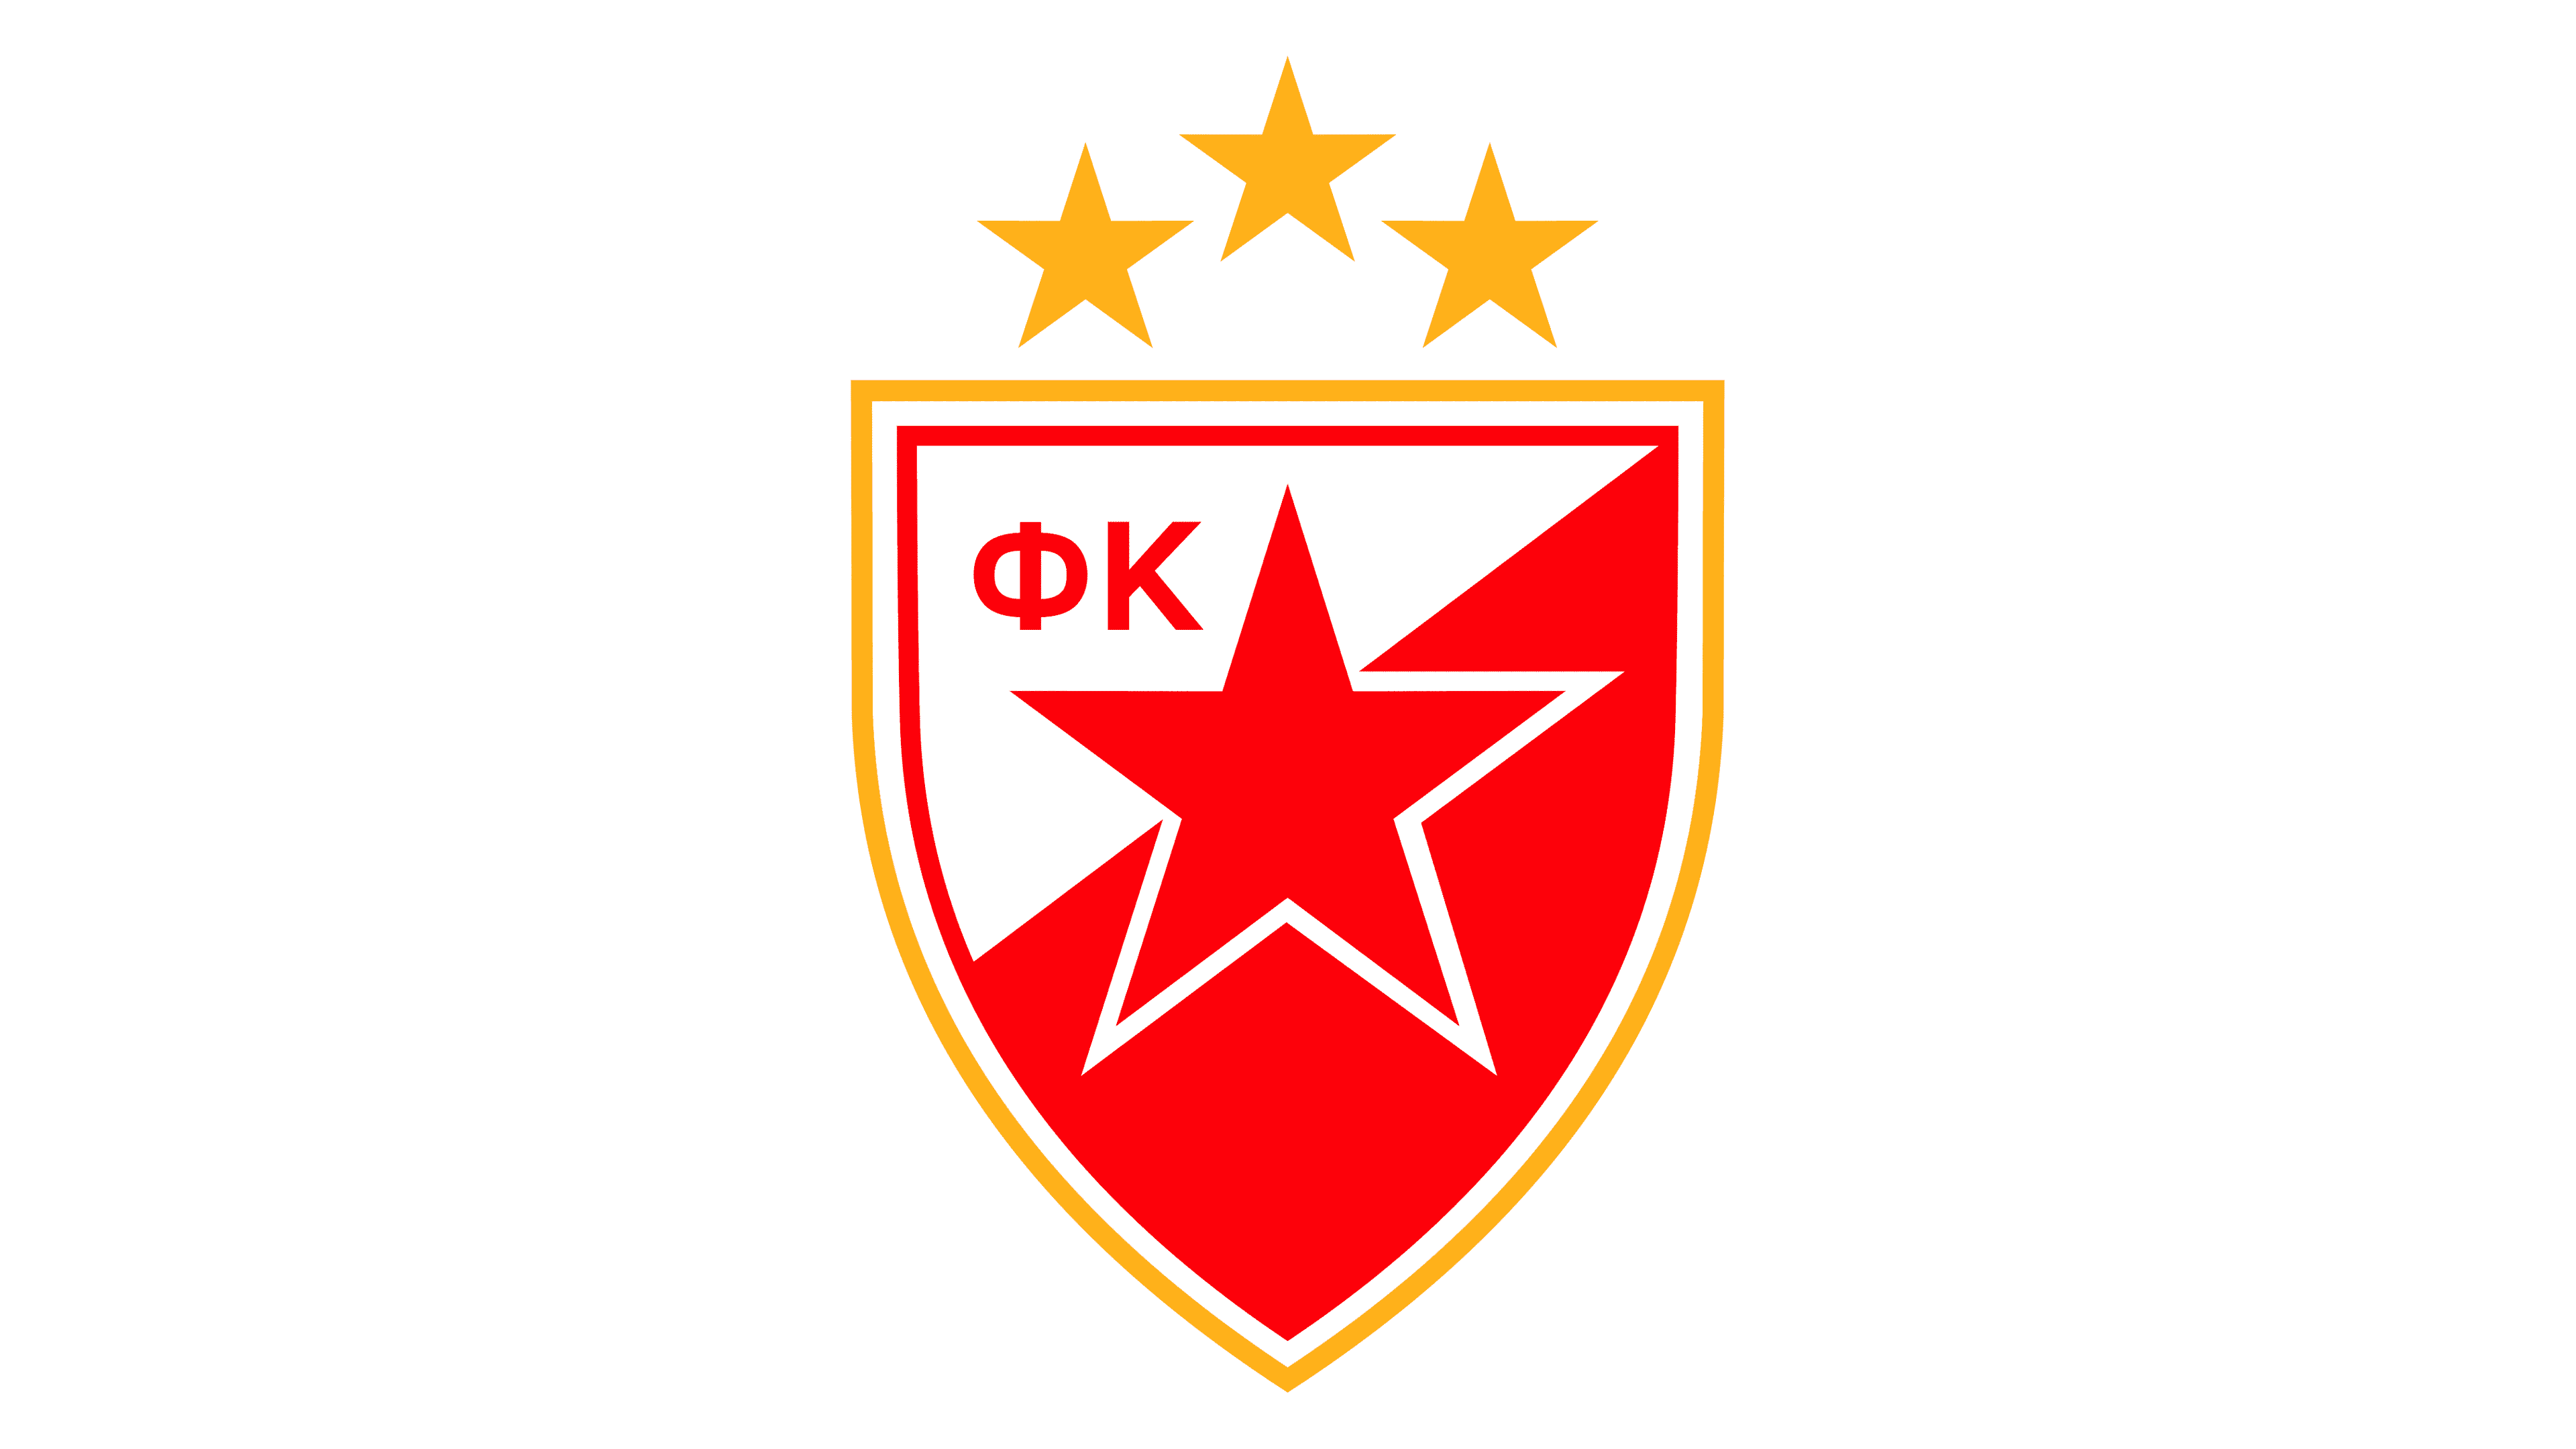 Who are Crvena Zvezda, and is it the same club as Red Star Belgrade?